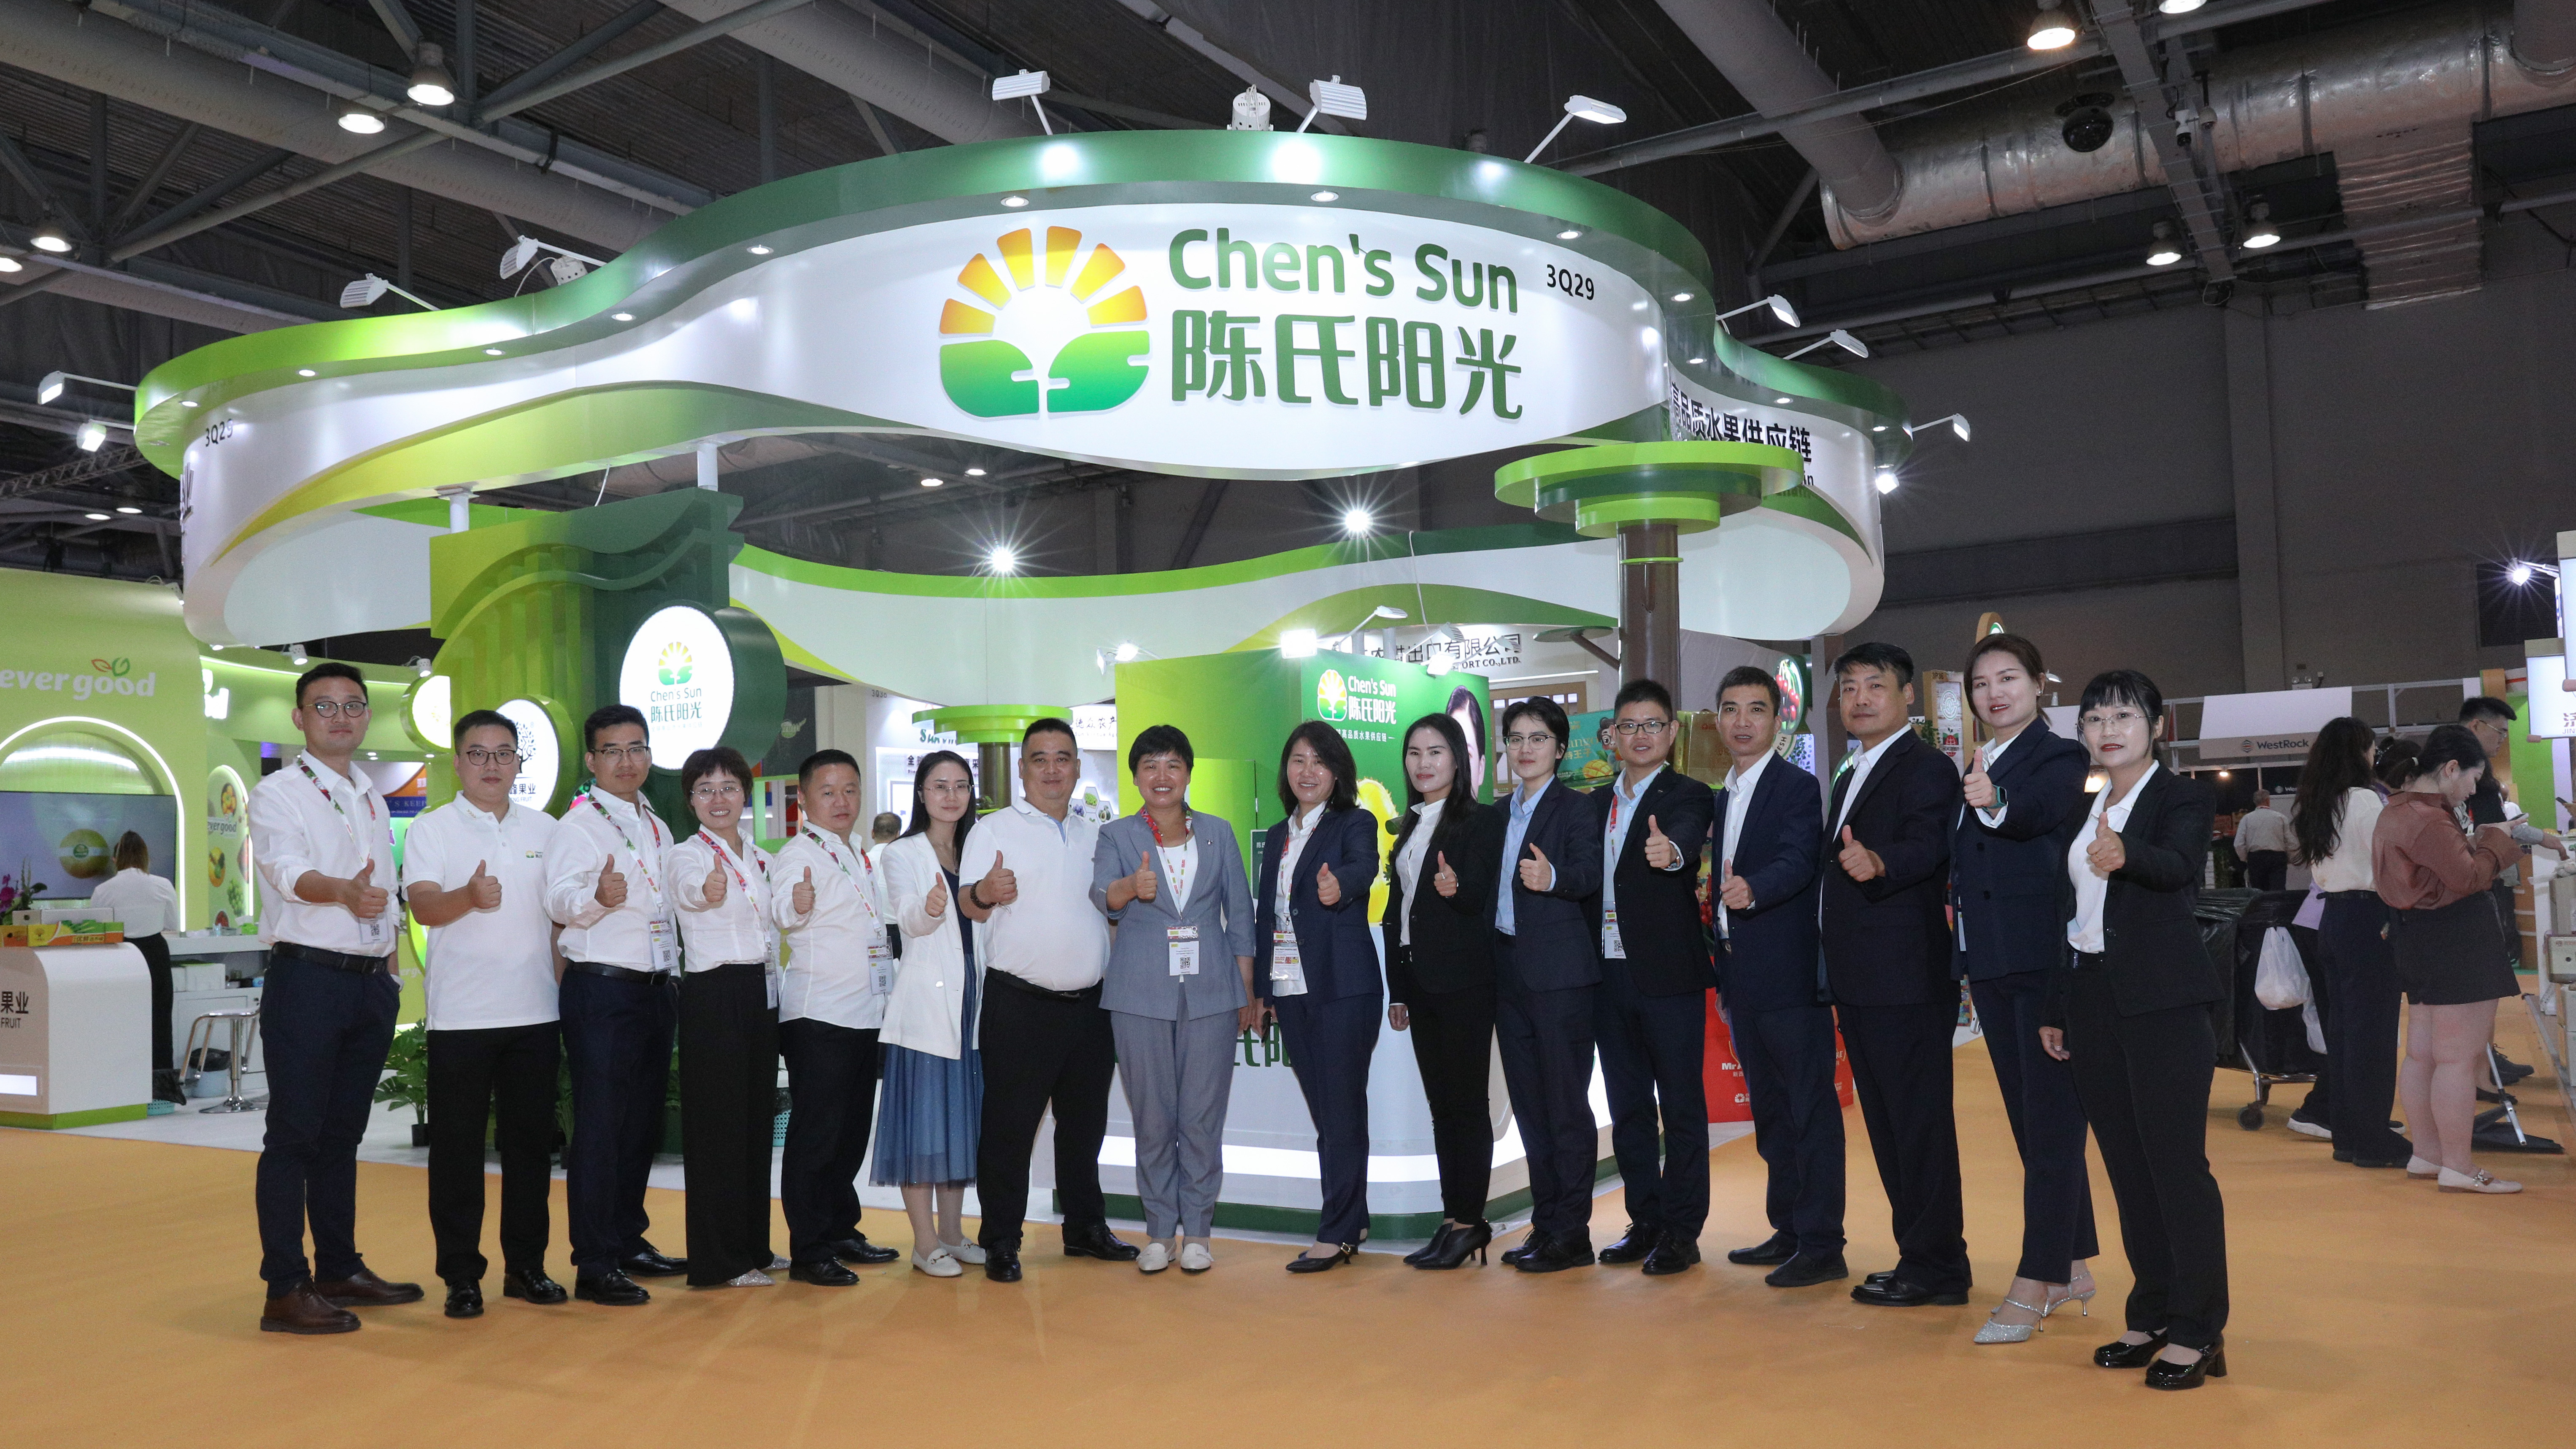 Chen's Sun Makes a Wonderful Appearance at the 16th Hong Kong Asia International Fruit and Vegetable Exhibition